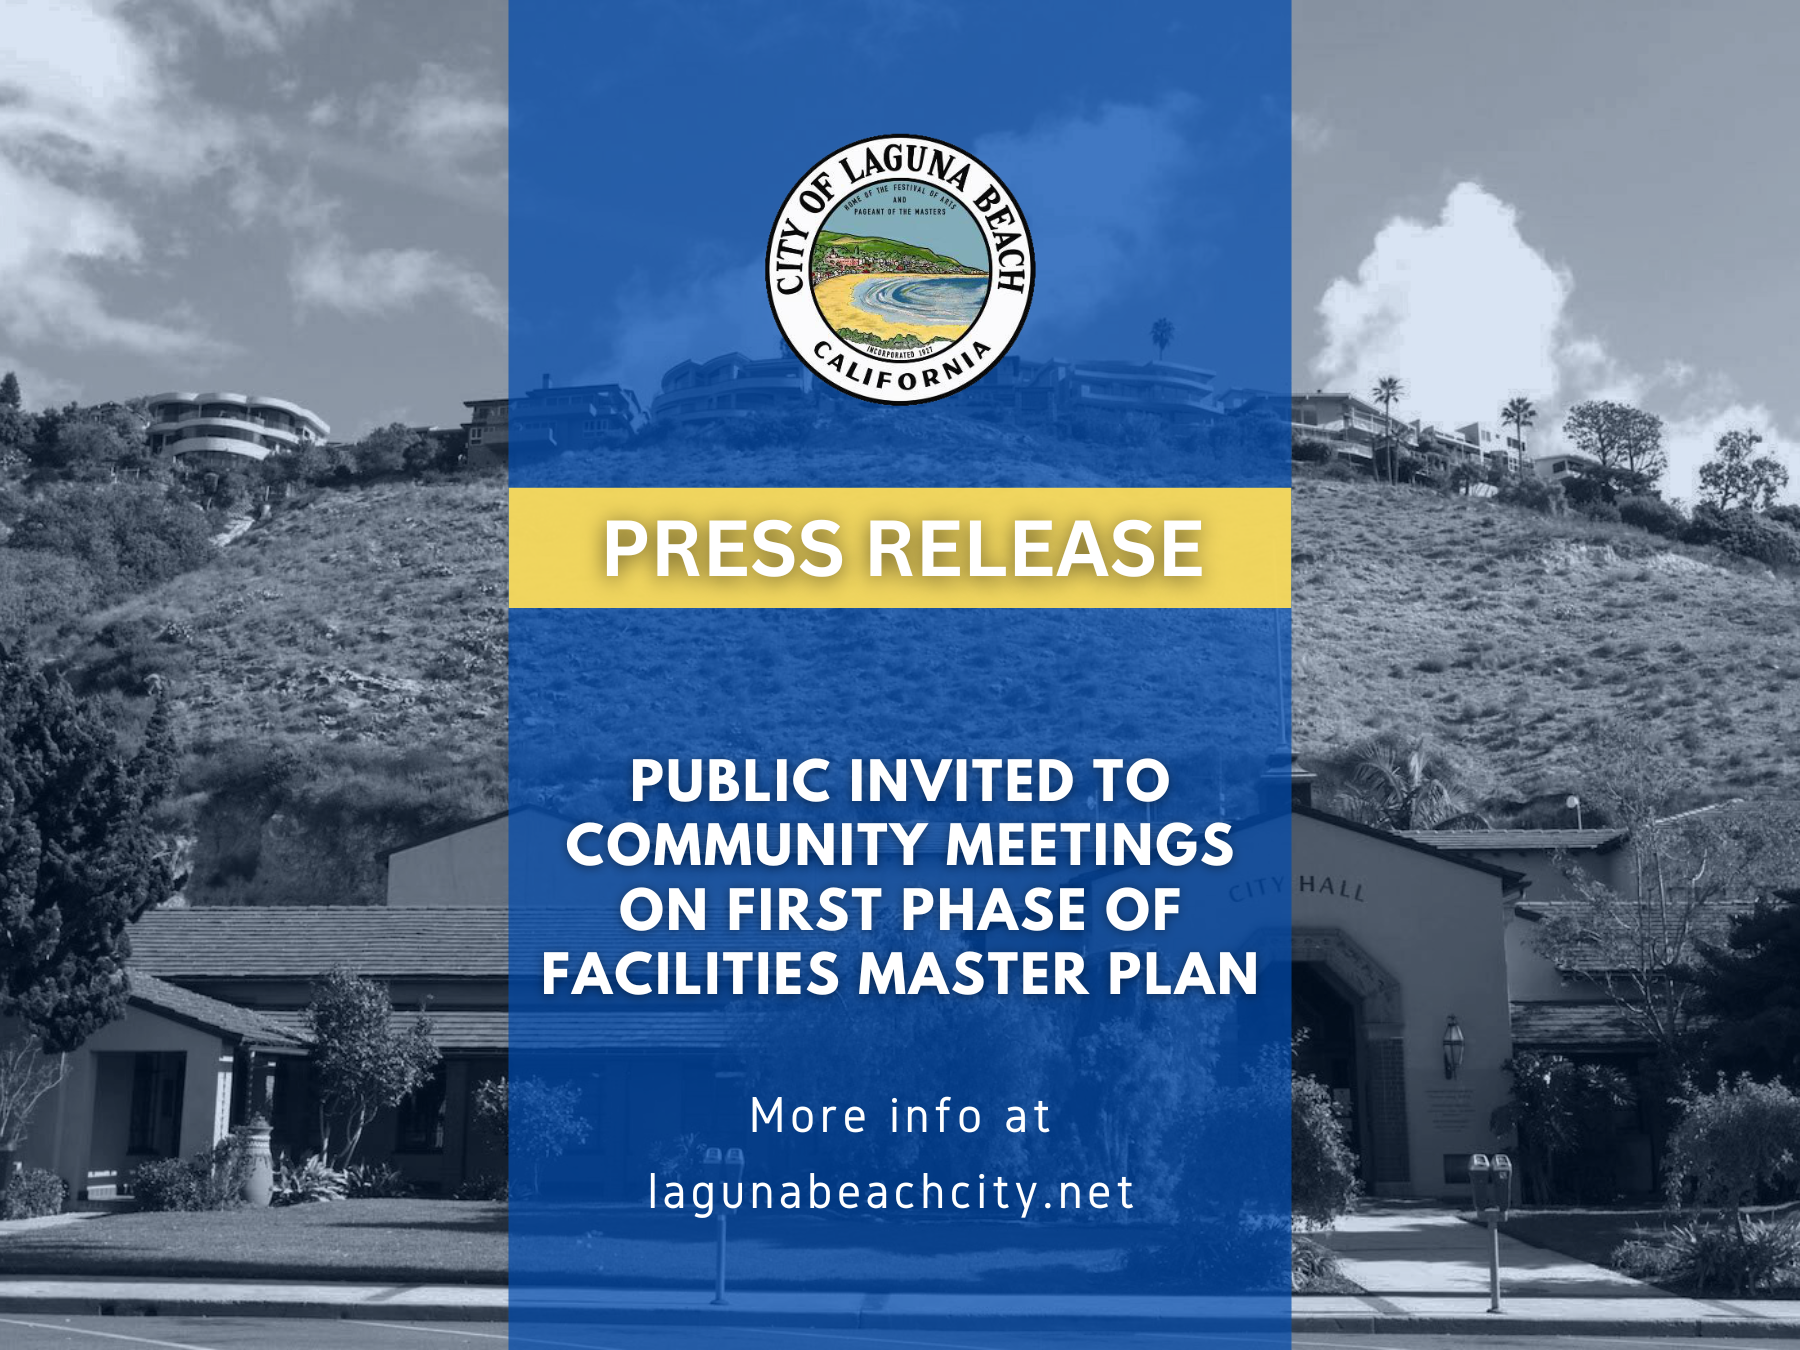 Press Release - Public Invited to Community Meetings on First Phase of Facilities Master Plan